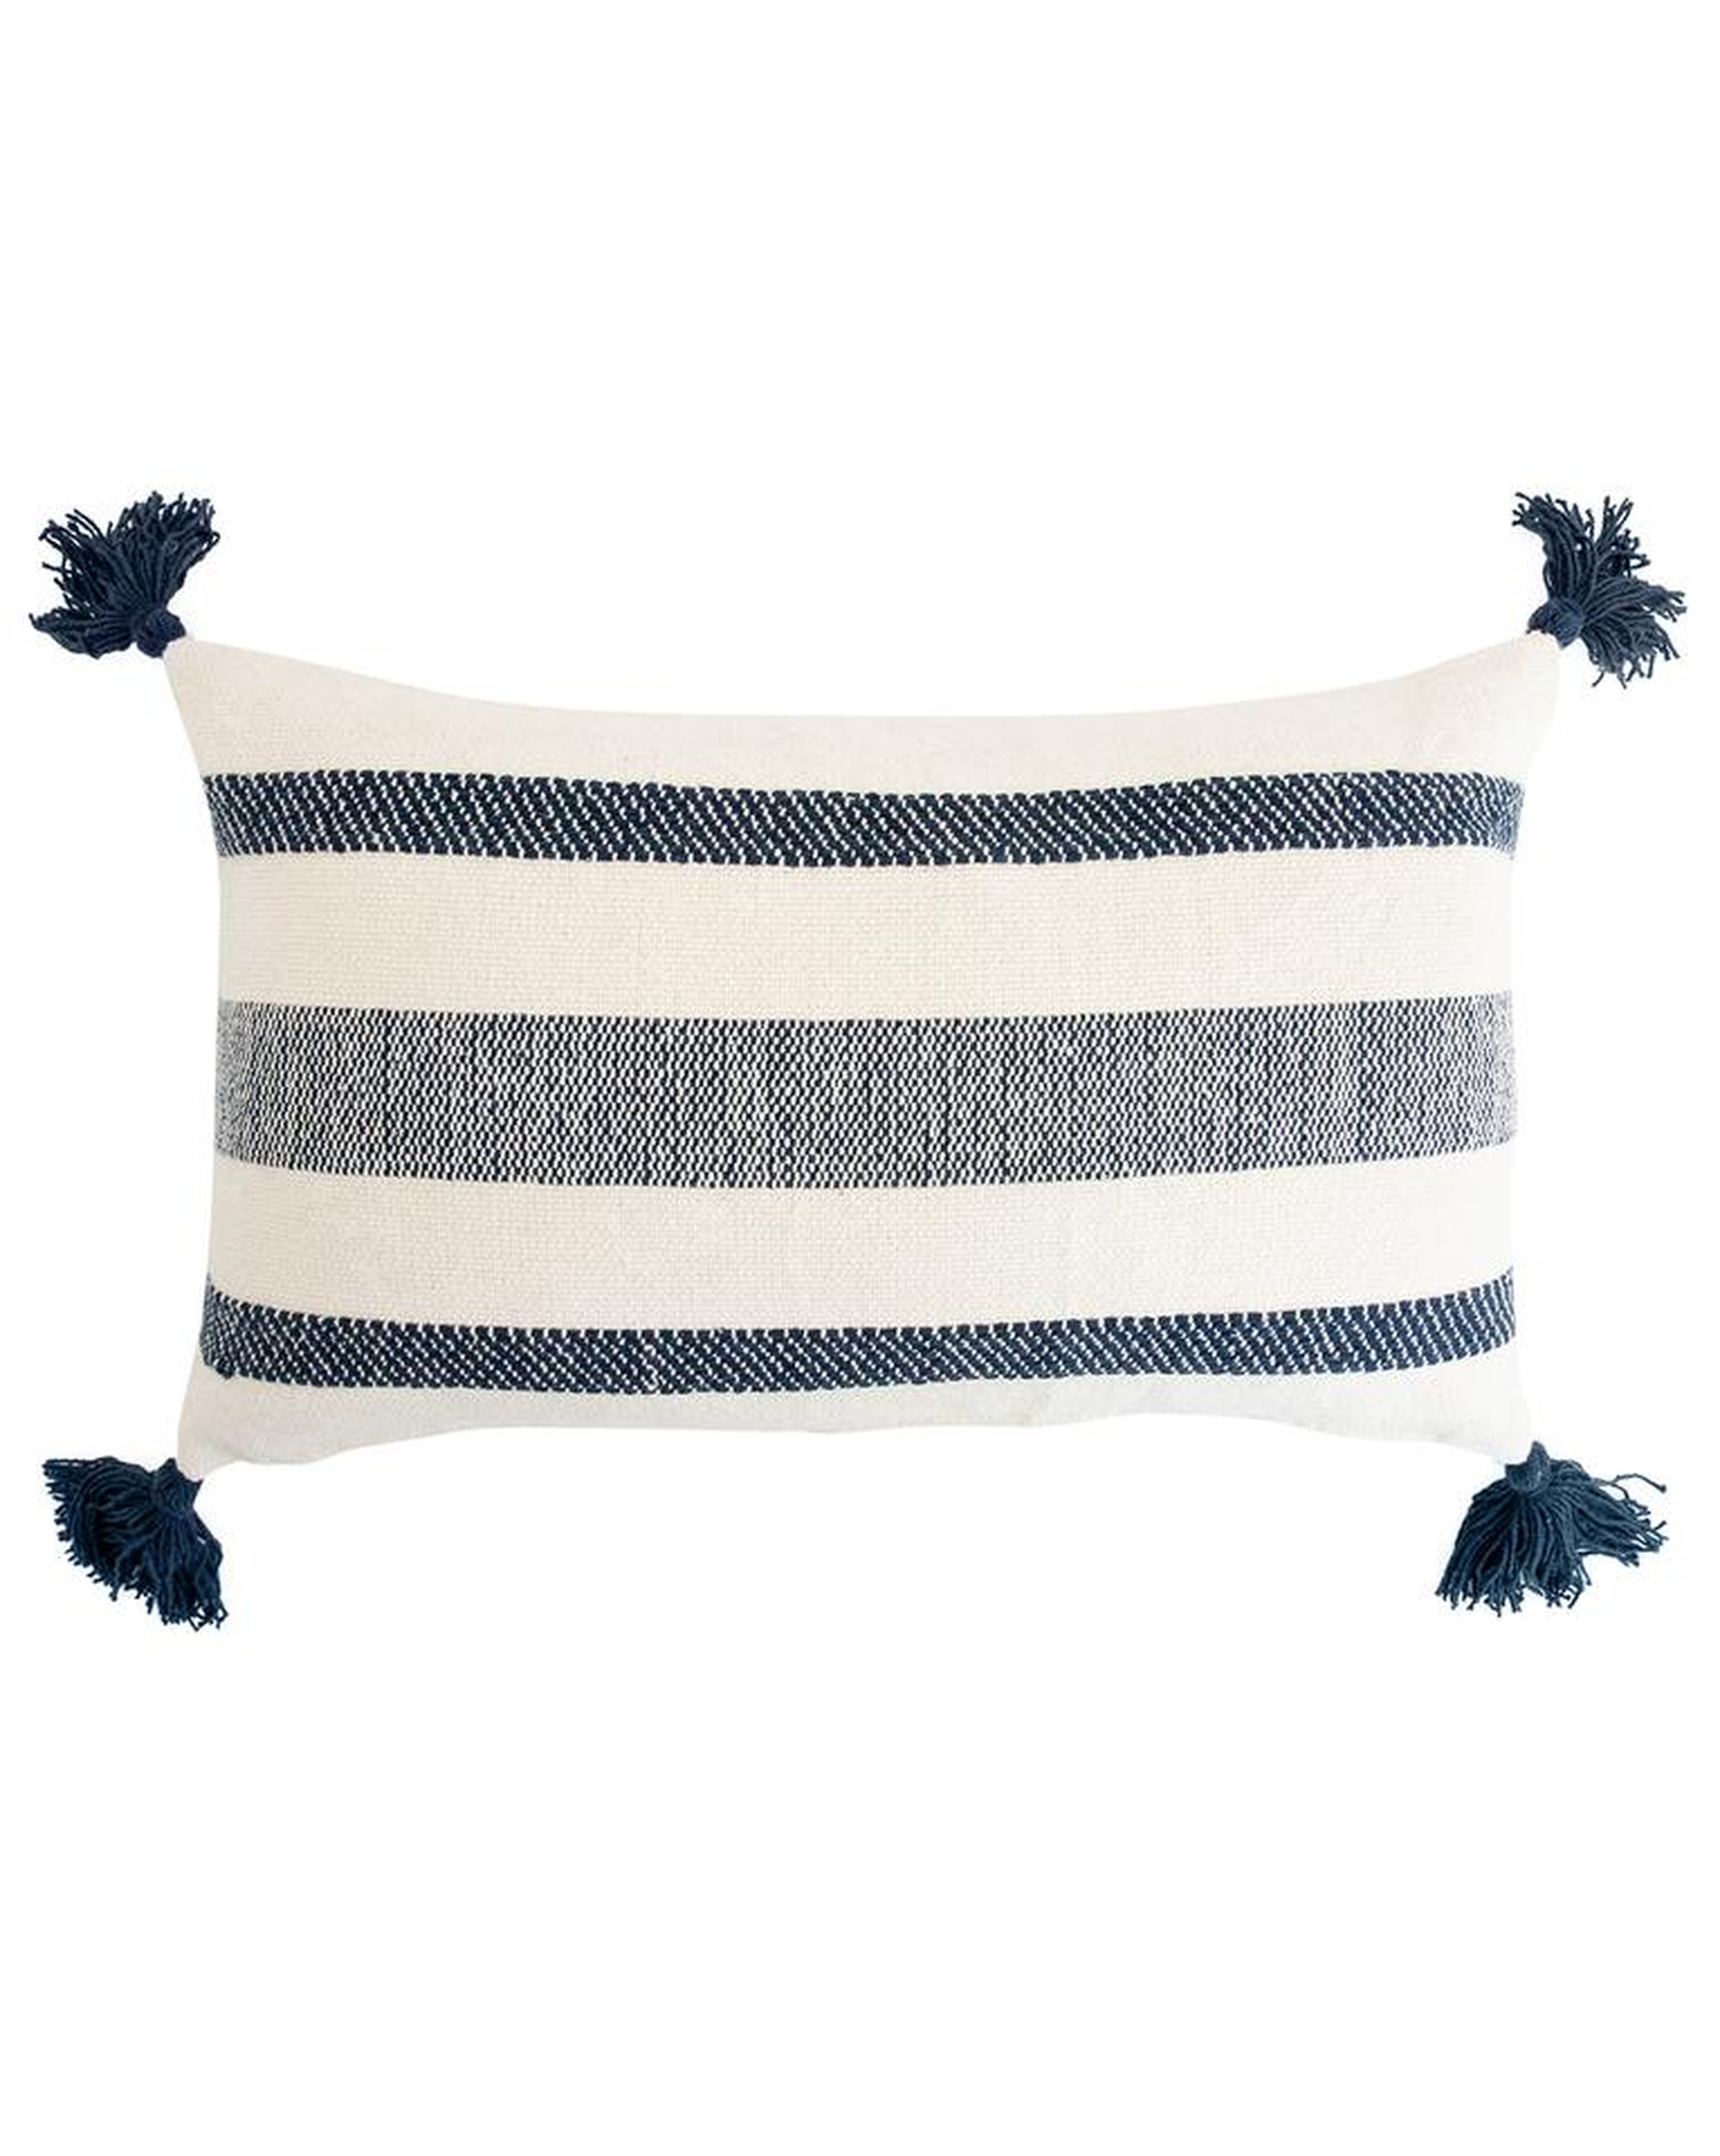 MONI PILLOW WITHOUT INSERT, 12" x 20" - McGee & Co.